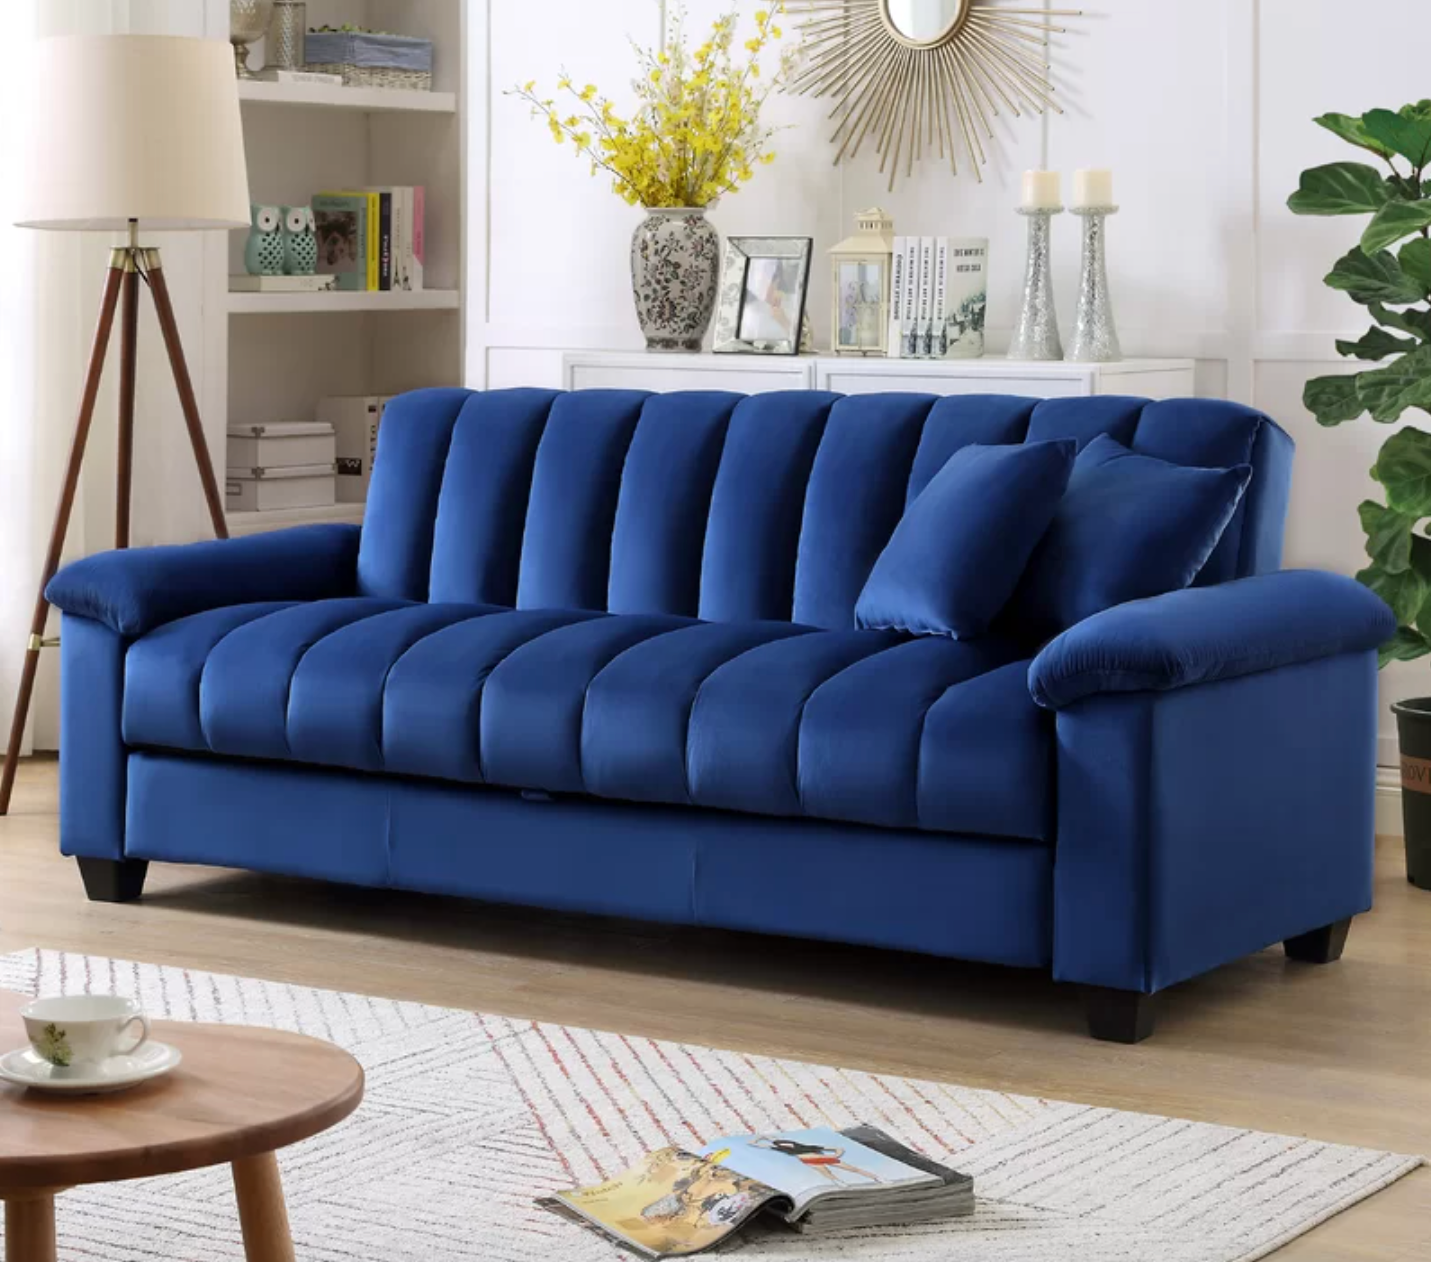 The 10 Best Deals on Sleeper Sofas Available at Wayfair Right Now |  Entertainment Tonight